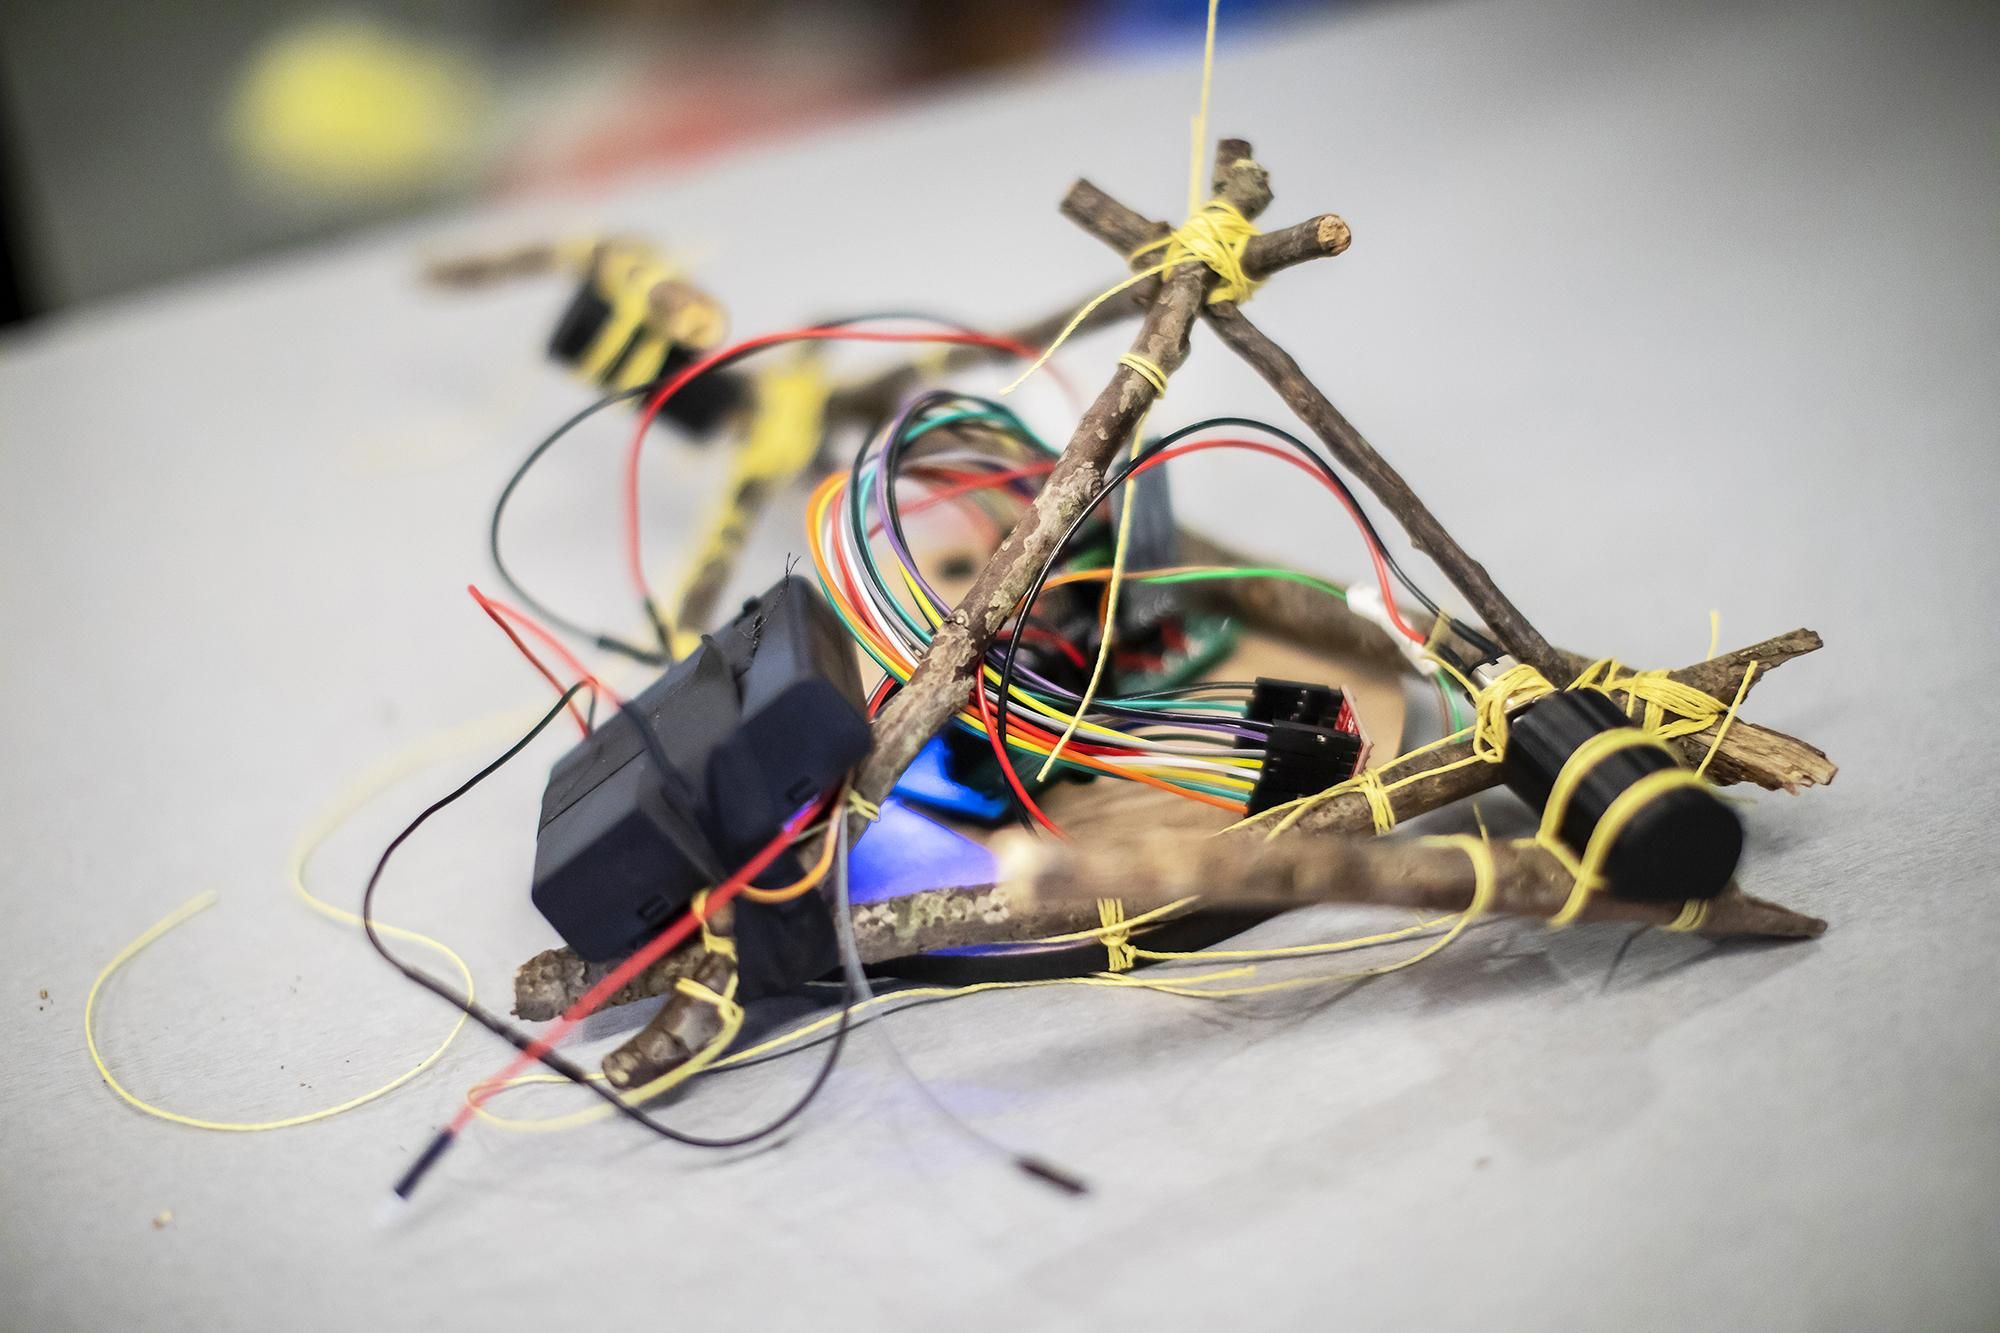 An image of a robot made of a small sticks tied together with a tangle of colorful wires, batteries, actuators, and electronics